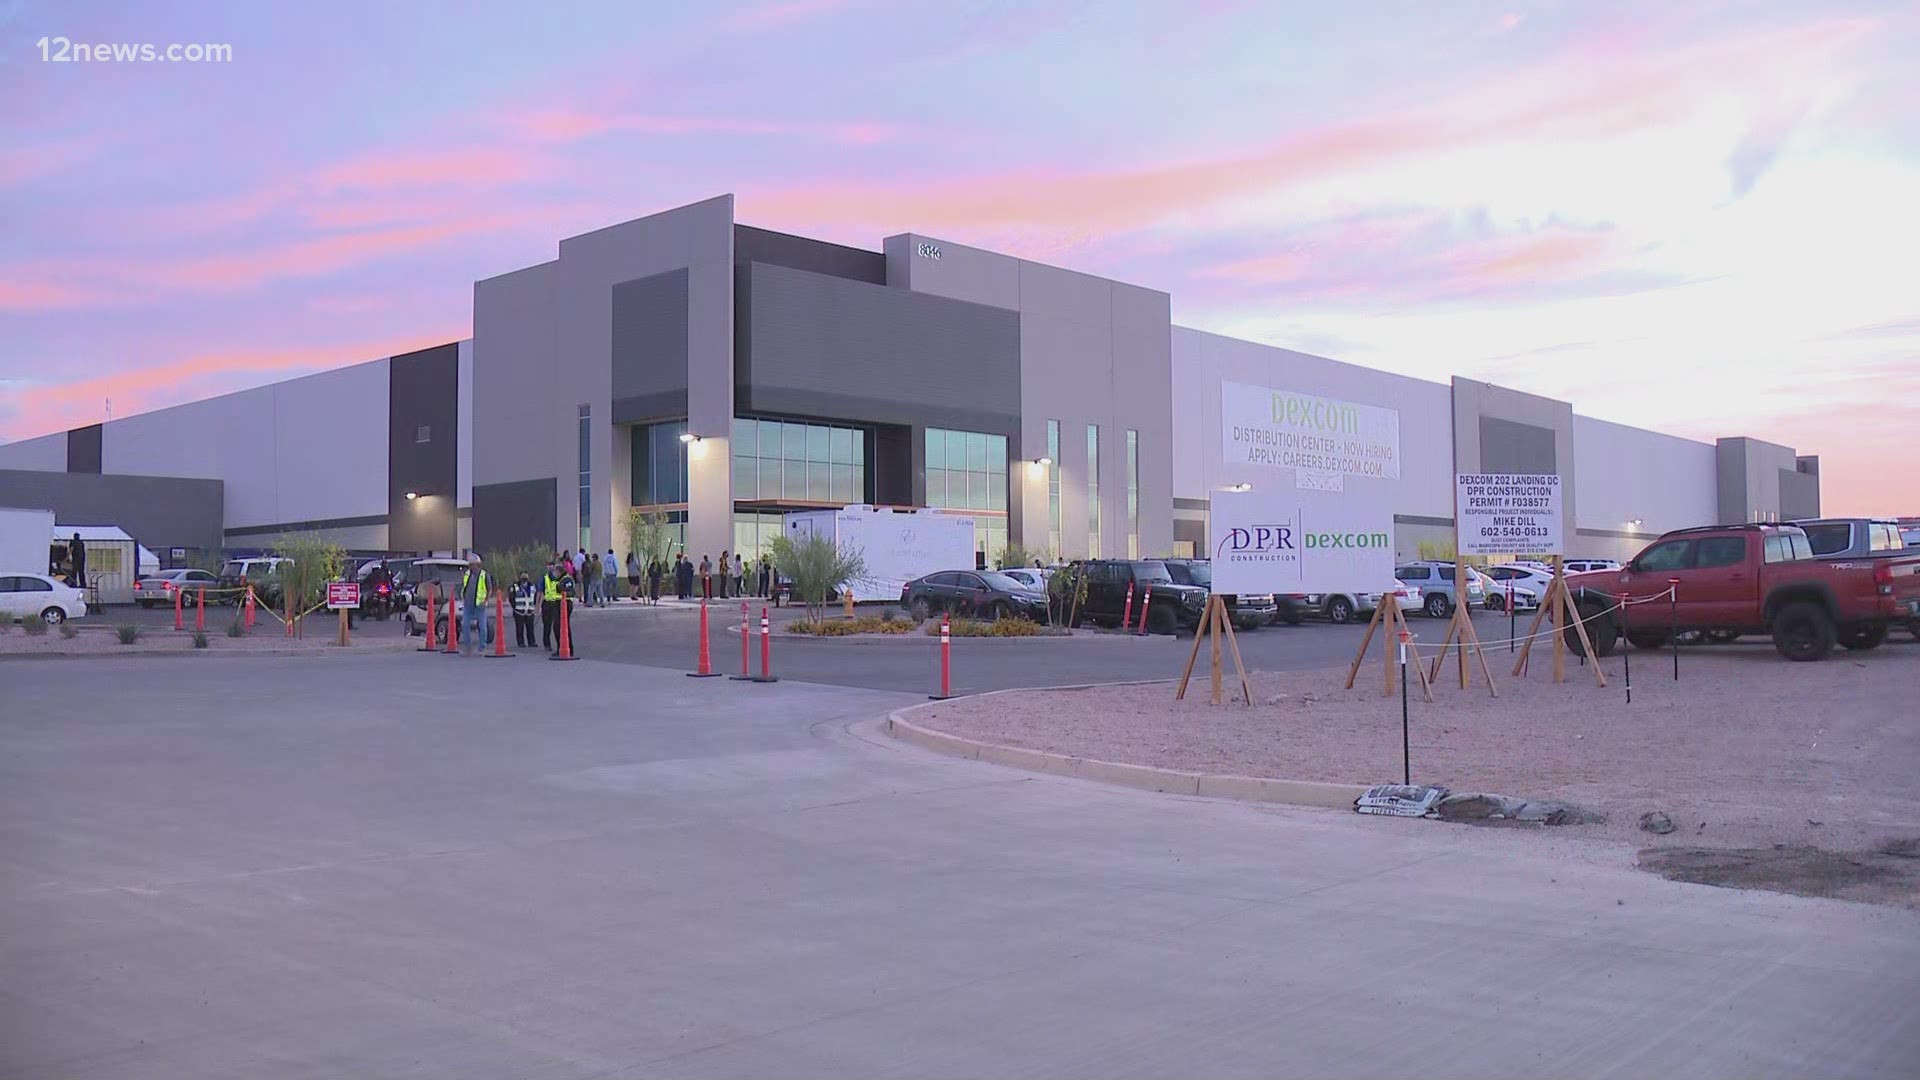 A new indoor COVID-19 vaccination site is opening up today in Mesa. Matt Yurus has the details.